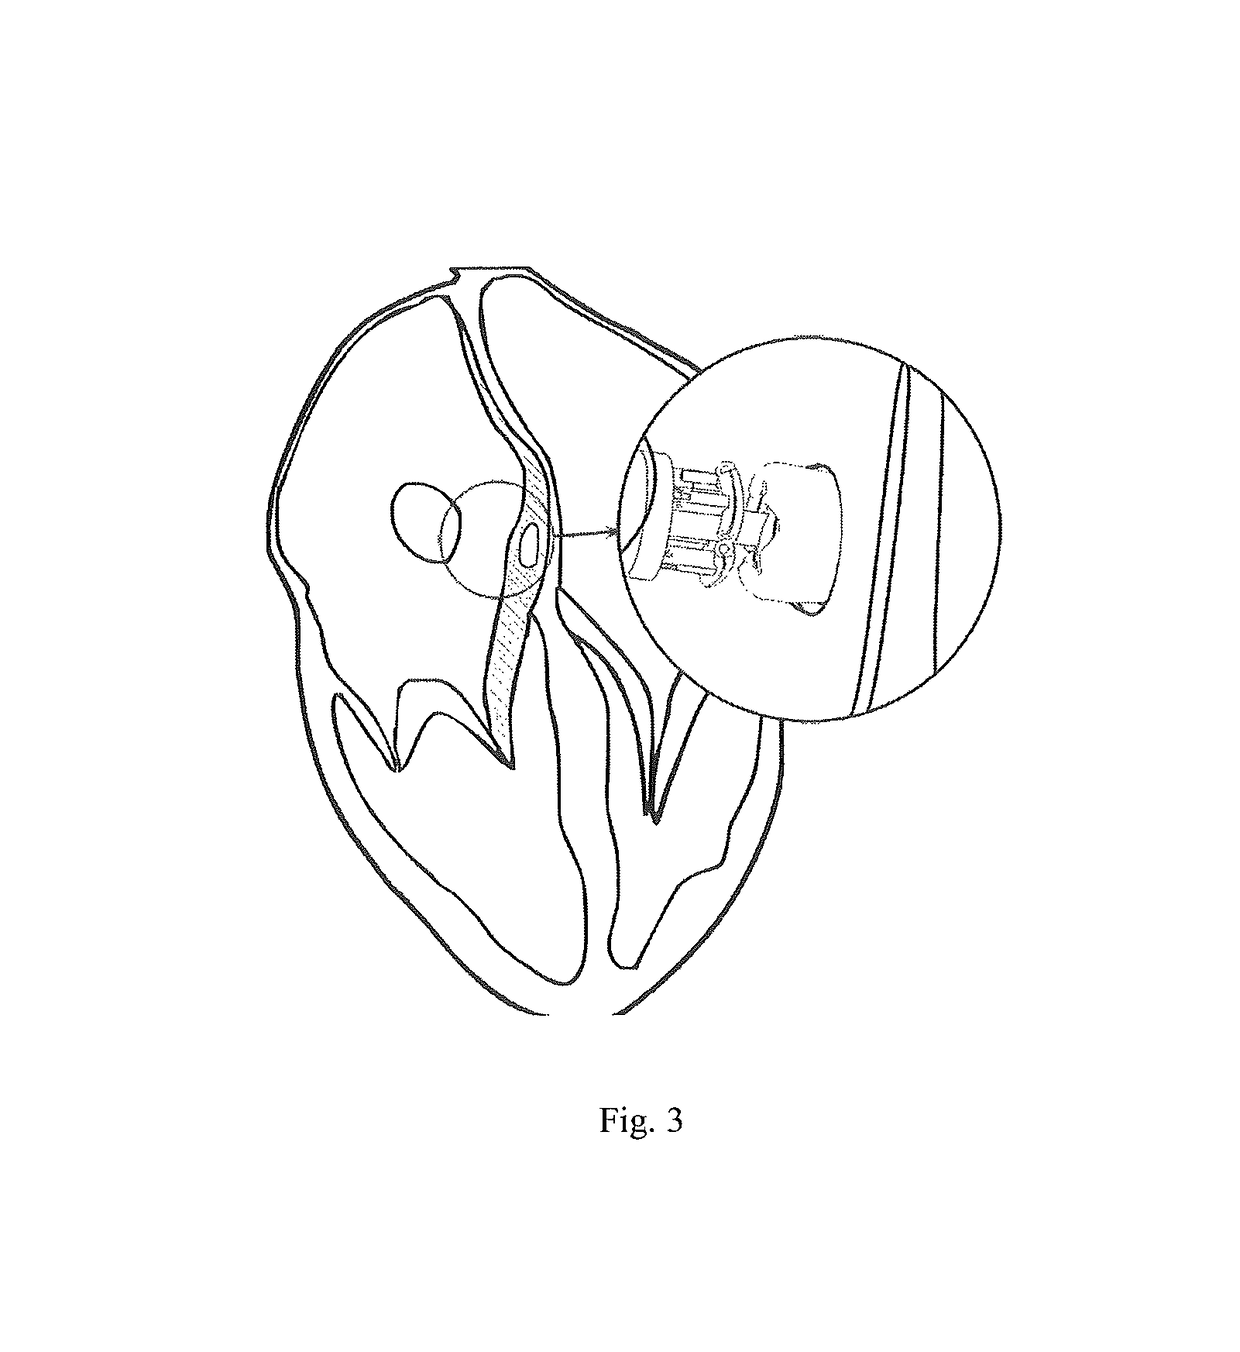 Device for percutaneous transcathertral closure of atrial septal defect by deploying pericardial patch